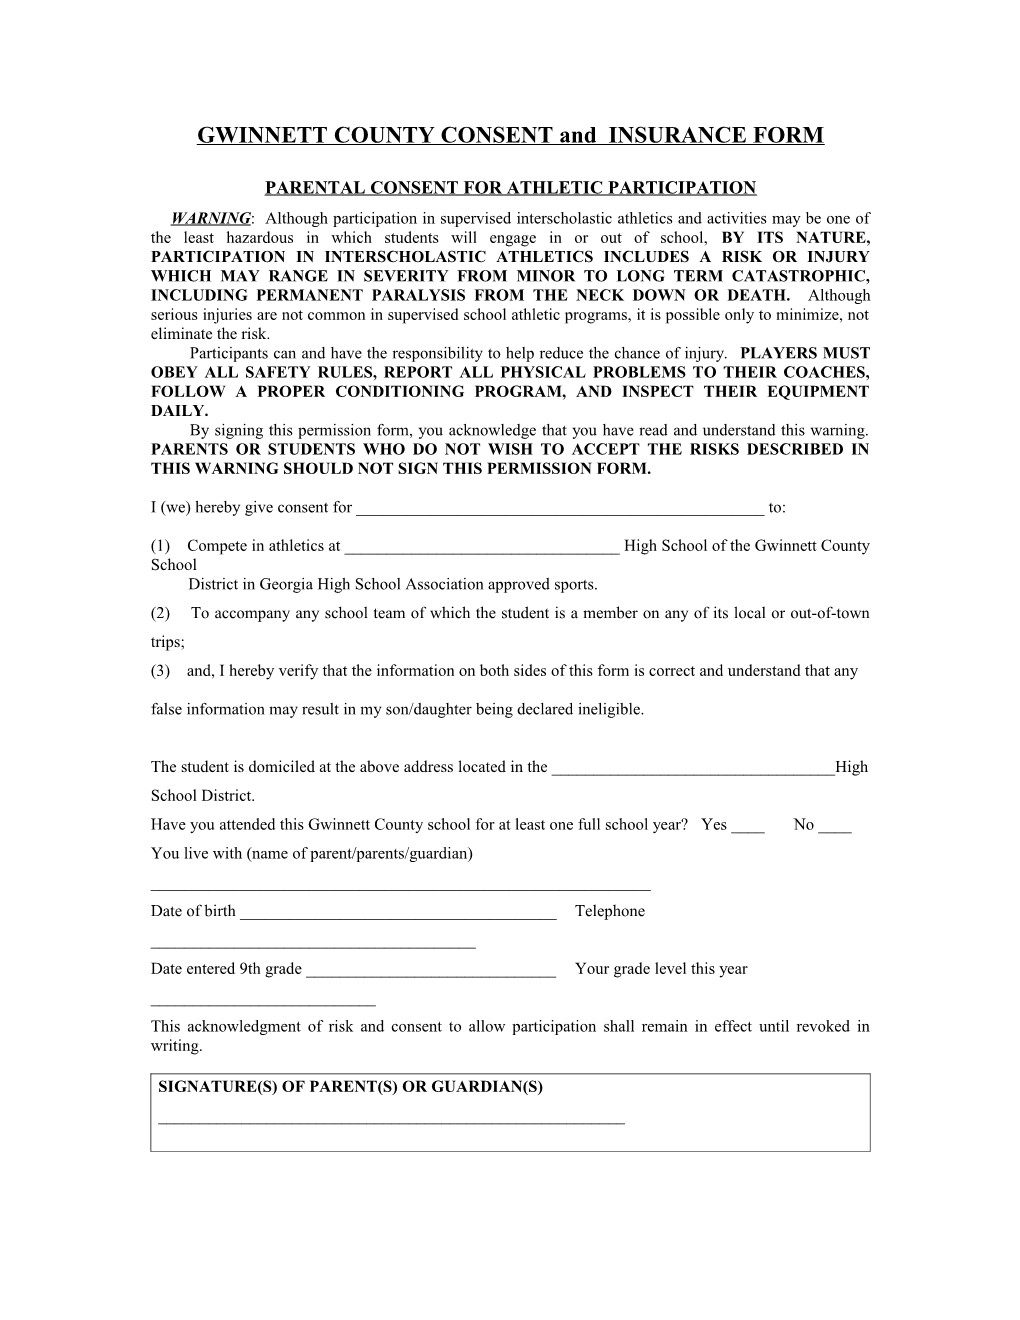 GWINNETT COUNTY CONSENT and INSURANCE FORM